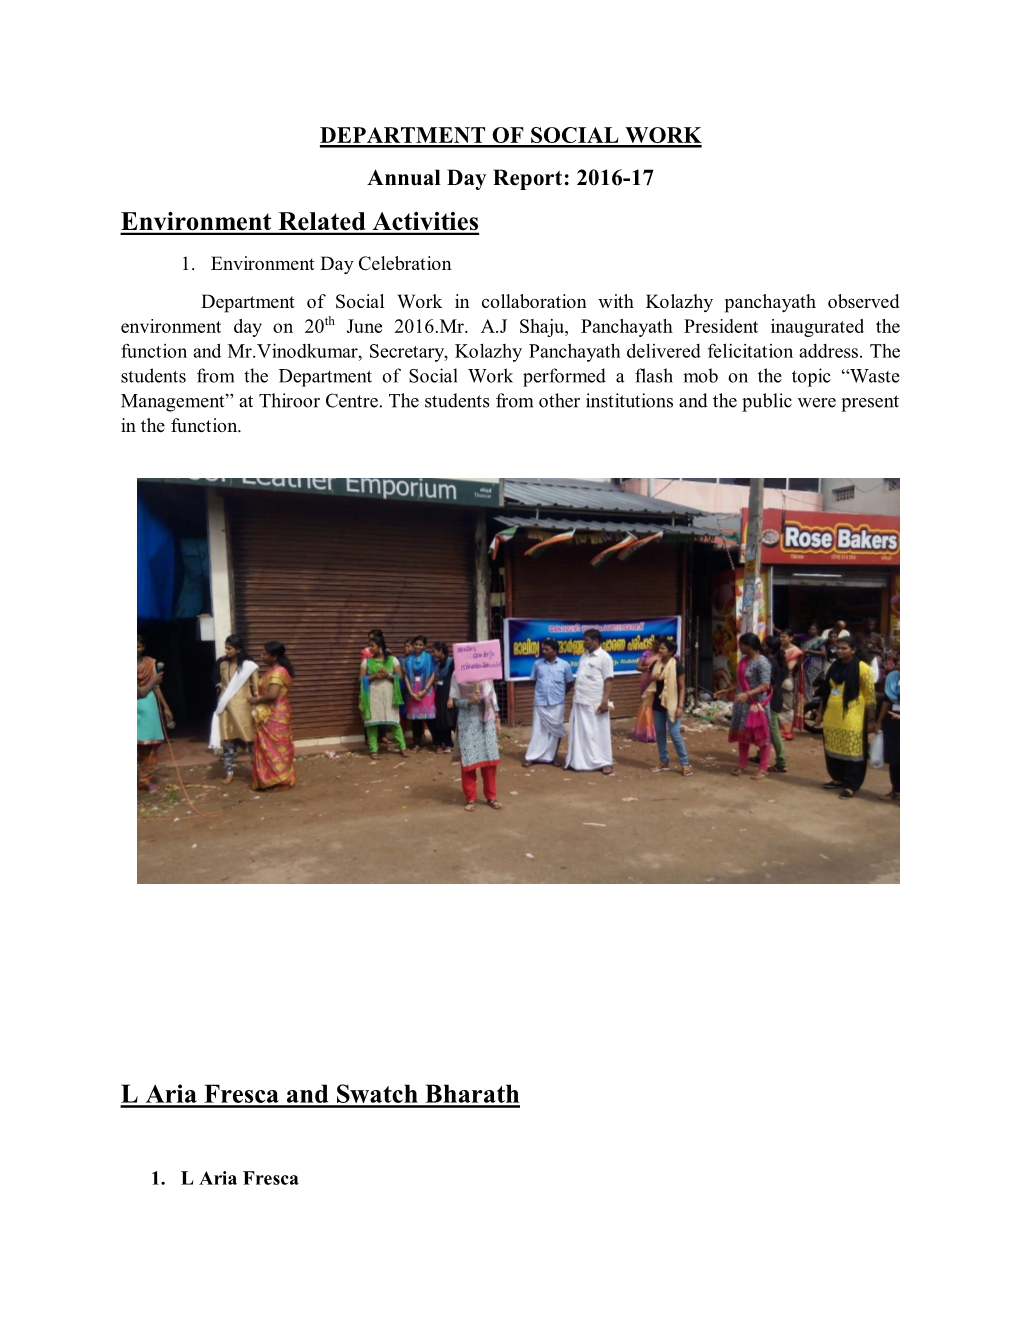 Environment Related Activities L Aria Fresca and Swatch Bharath